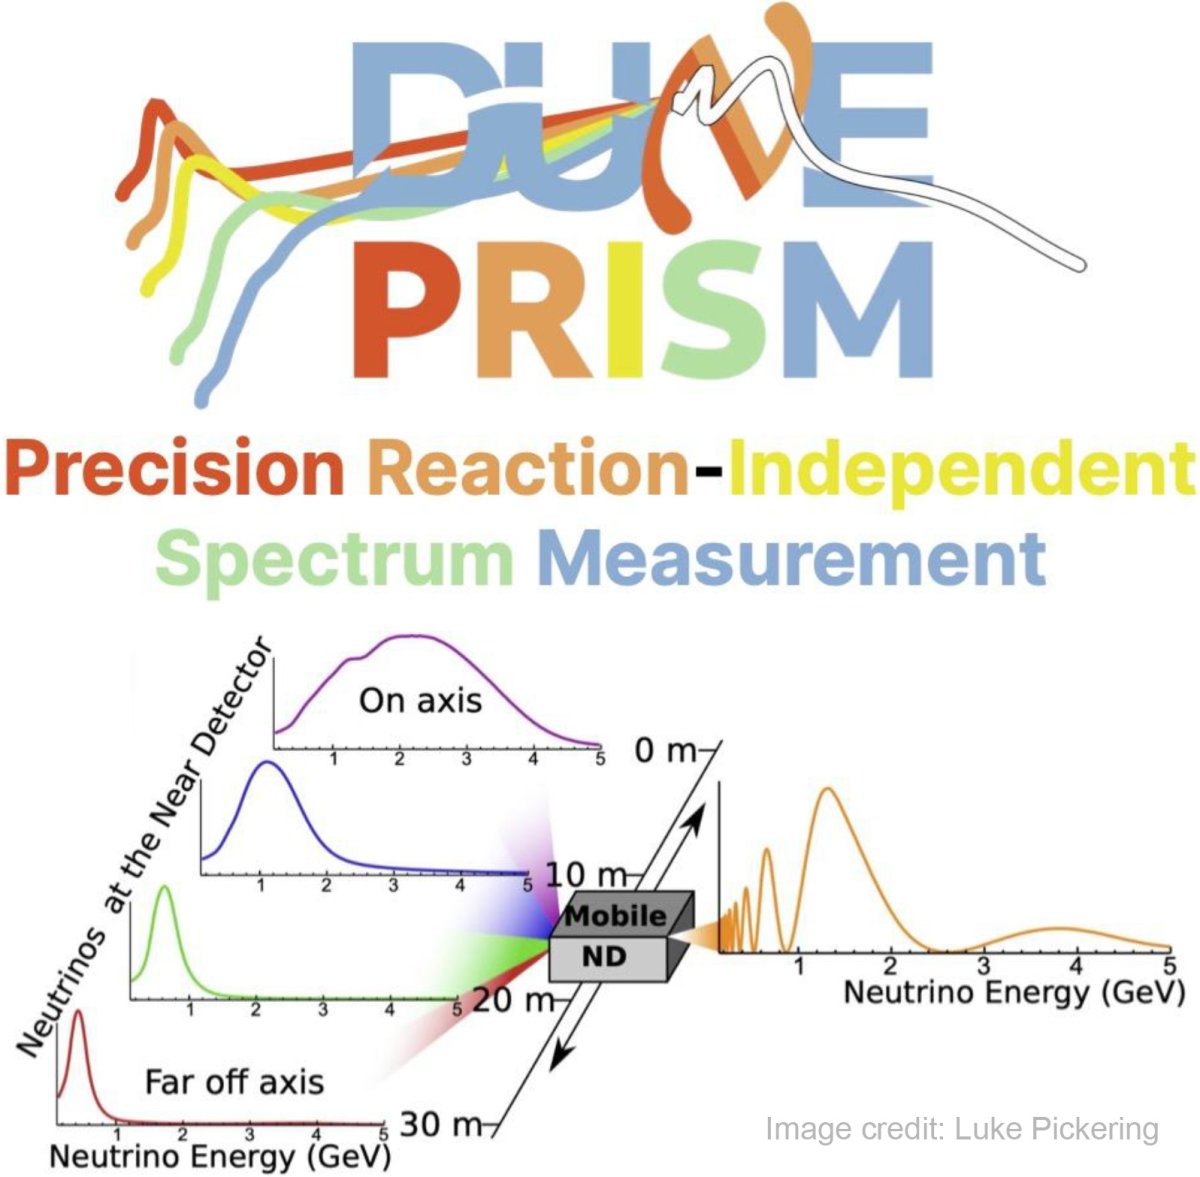 Title reads DUNE PRISM with a rainbow motif, PRISM stands for Precise Reaction-Independent Spectrum Measurement. A graph representing Neturinos at the near detector, Neutrinos at the far detector is shown next to a drawing of a traditional light prism that is labeled "mobile ND" yielding graph with the measurement of neutrino energy. 